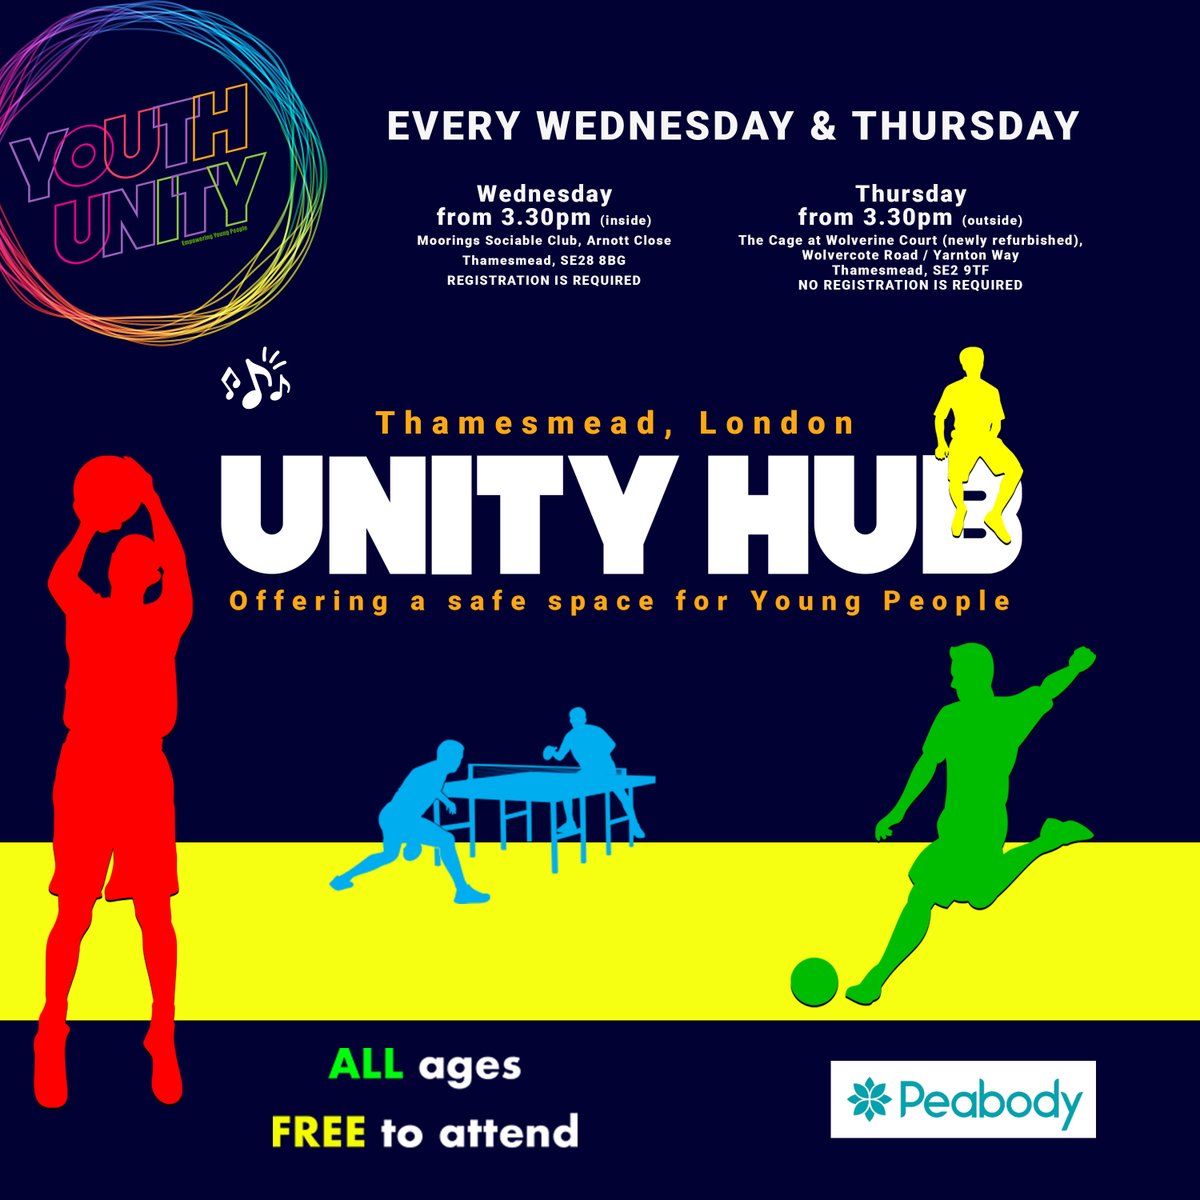 Youth Unity provides a space for young people to take part in activities like sports and music, as well as receive different support services. Sessions take place on Wednesdays (the Moorings) and Thursdays (the Cage). Find out more 👉 bit.ly/43oJH4Y @PeabodyLDN